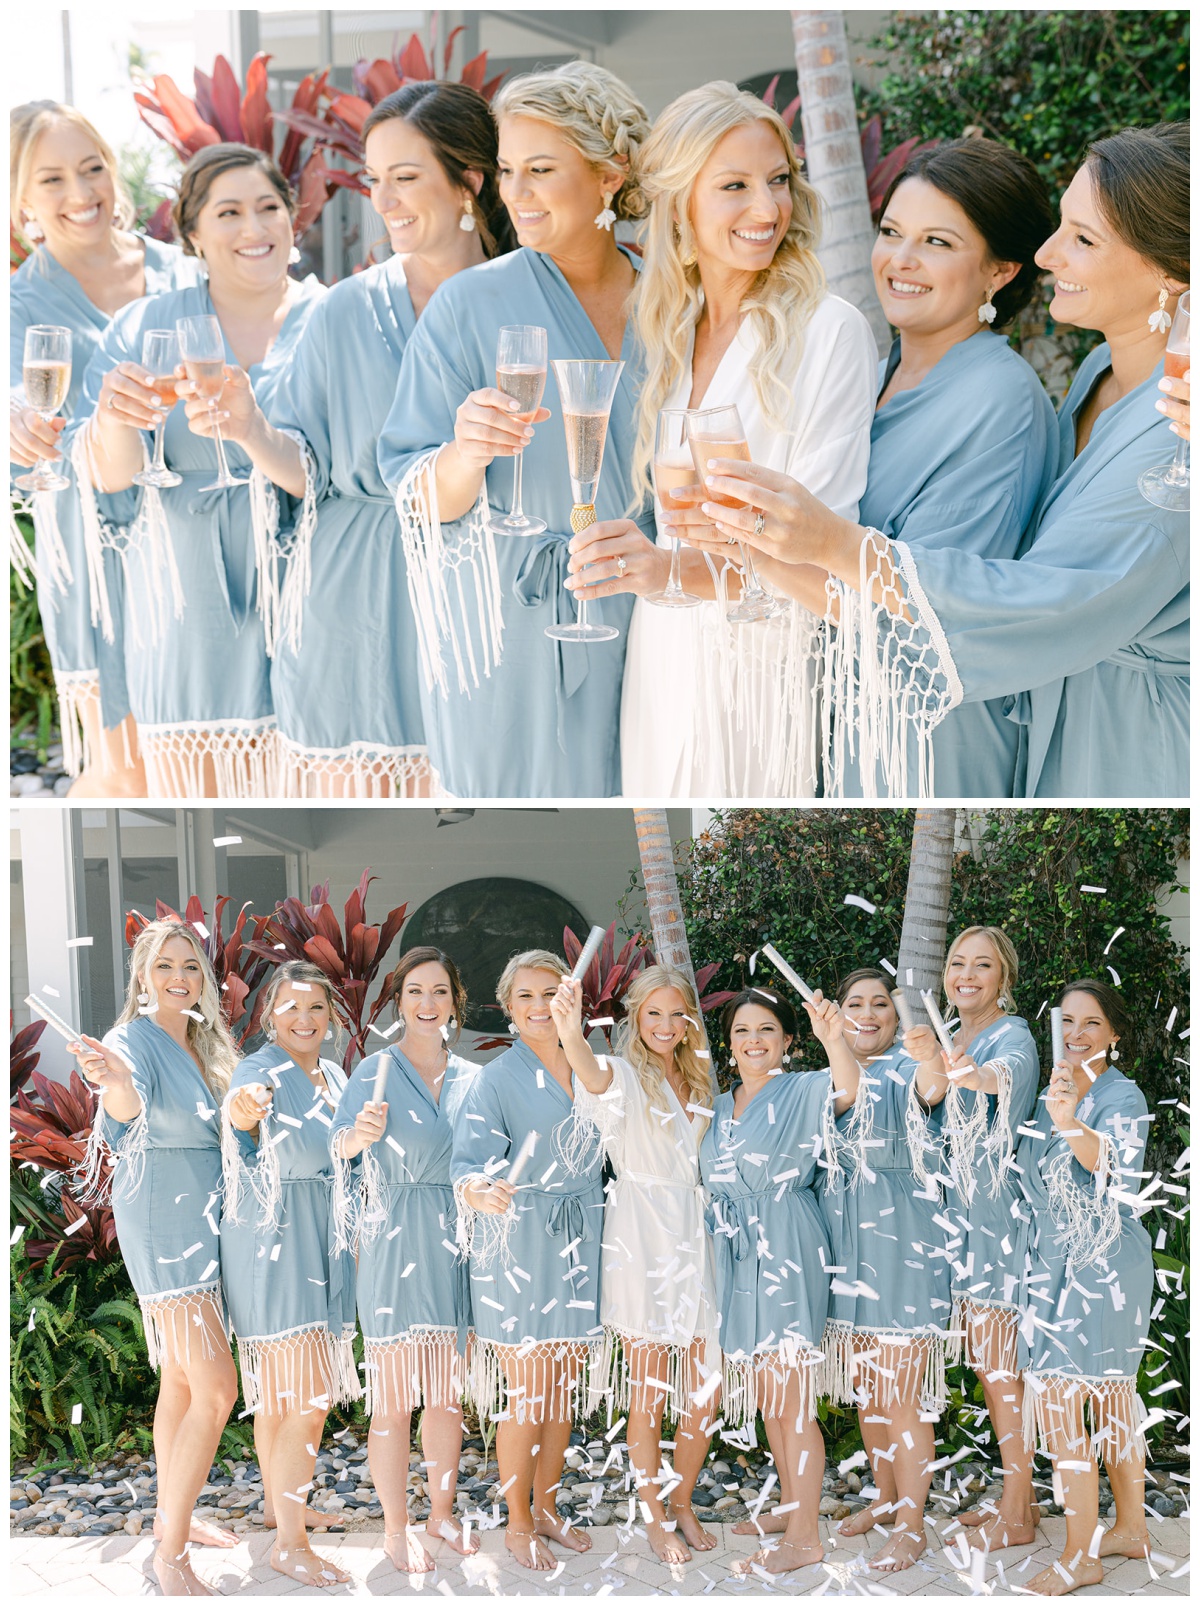 blue and white bridesmaid getting ready robes for destination wedding in the Florida Keys